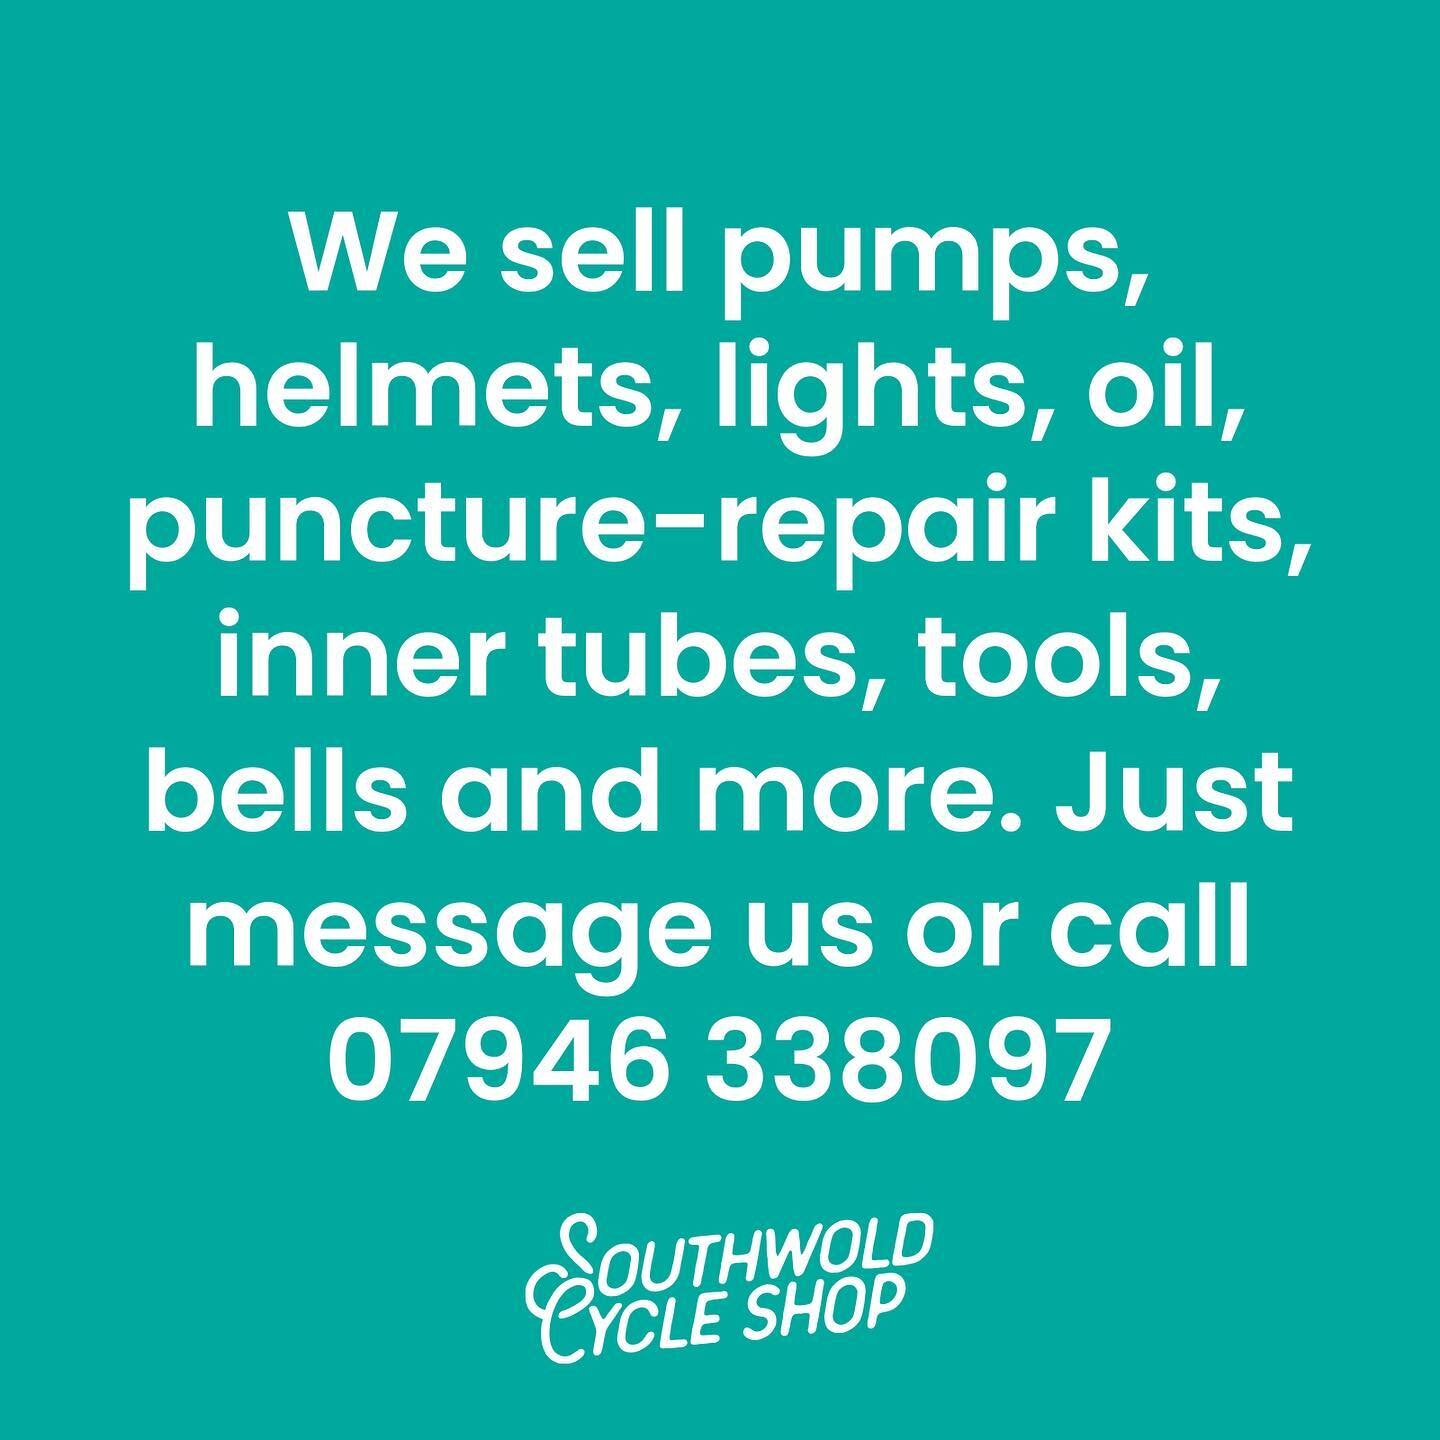 We sell pumps, helmets, lights, oil, puncture-repair kits, inner tubes, tools, bells and more. Just message us or call to find out what we&rsquo;ve got �07946 338097. Or come and say hello at the barn.